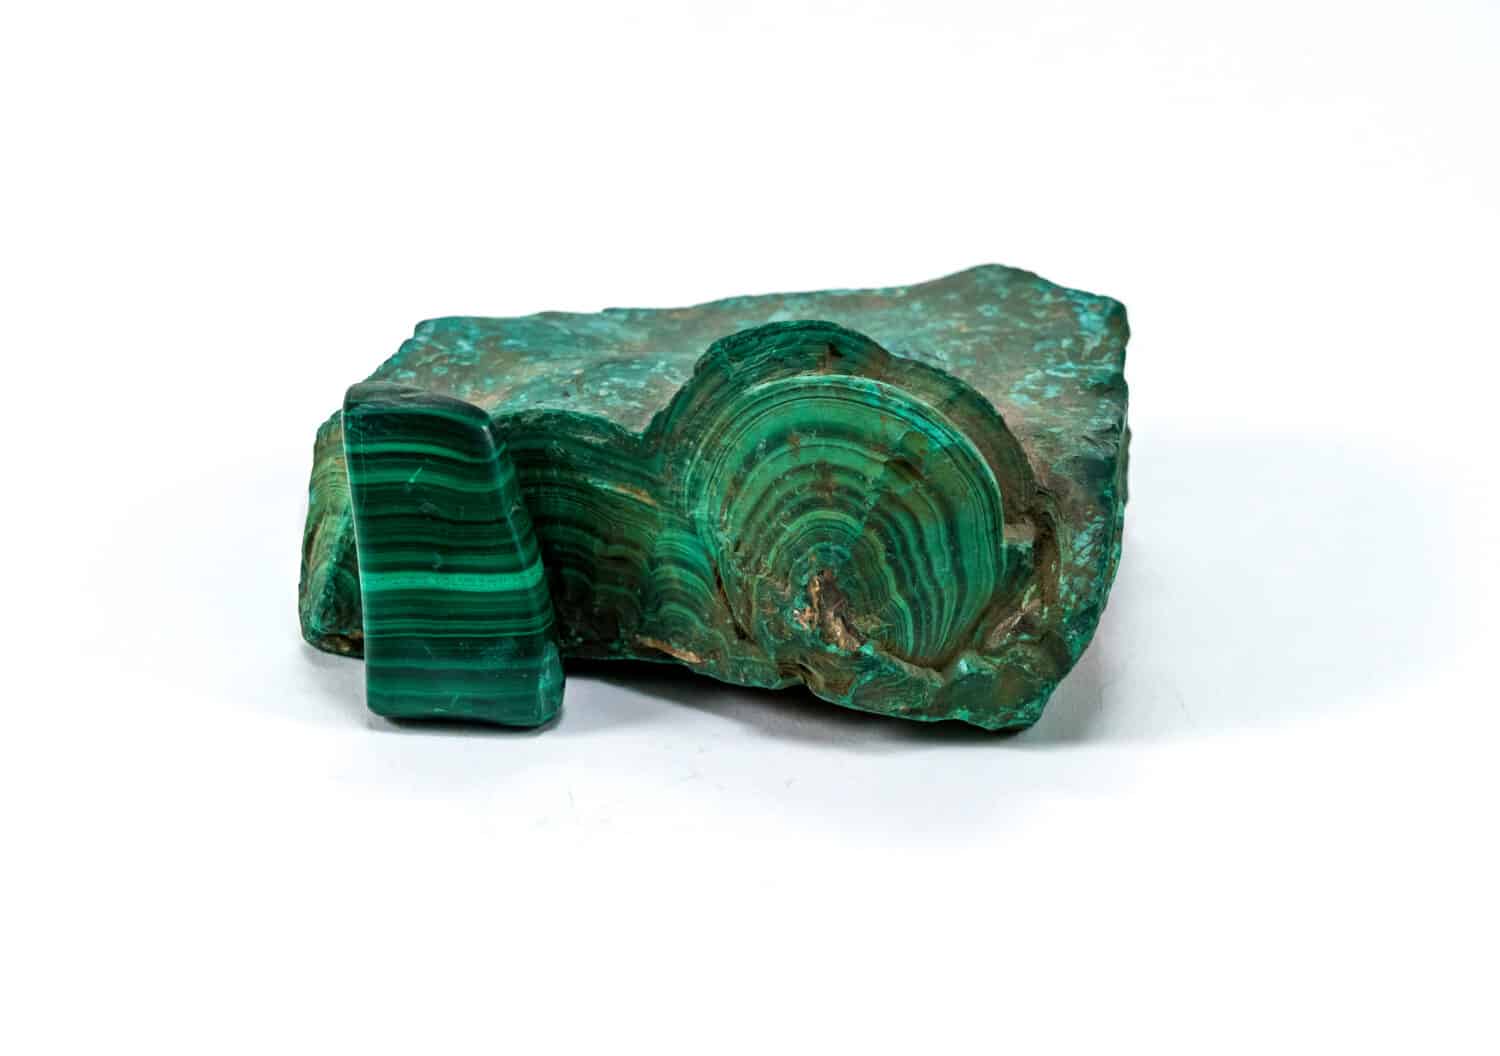 Green malachite mineral raw and polished isolated on white background